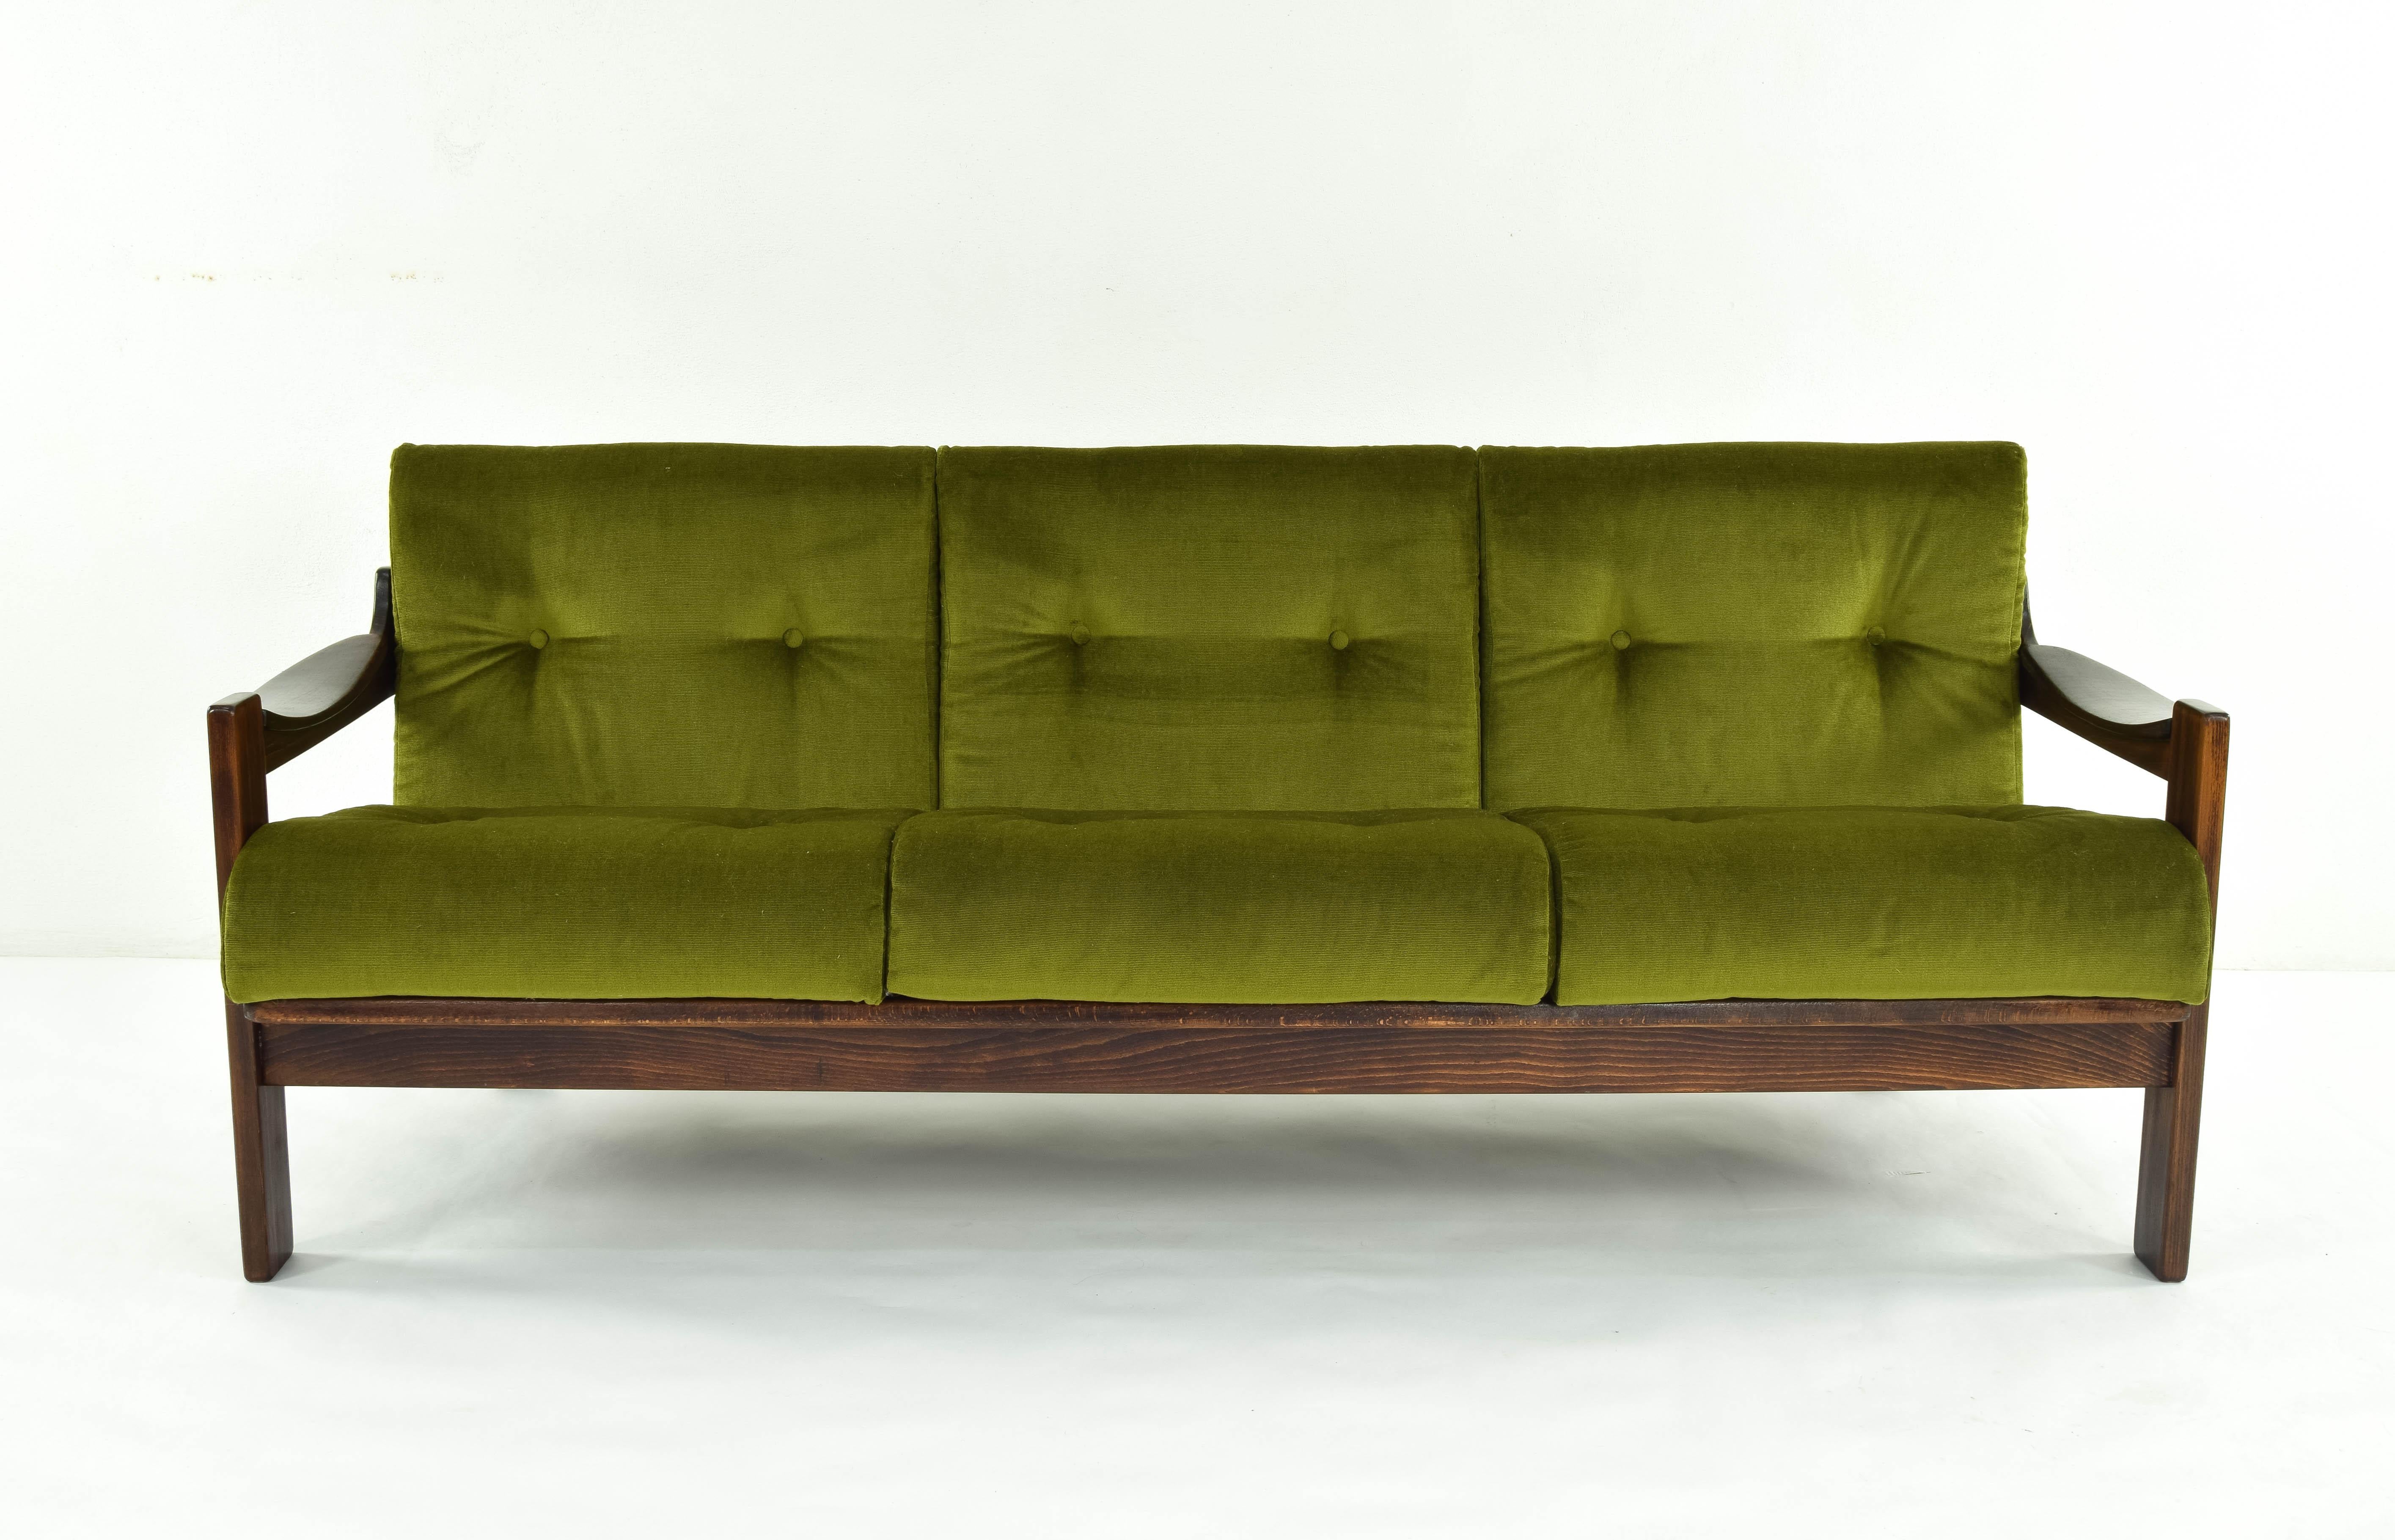 Sofa of the Spanish firm AG Barcelona produced in the 1970s. Modern and sophisticated design structure made of walnut and green velvet upholstery. New foams and rubber straps. A beautiful piece in excellent condition.